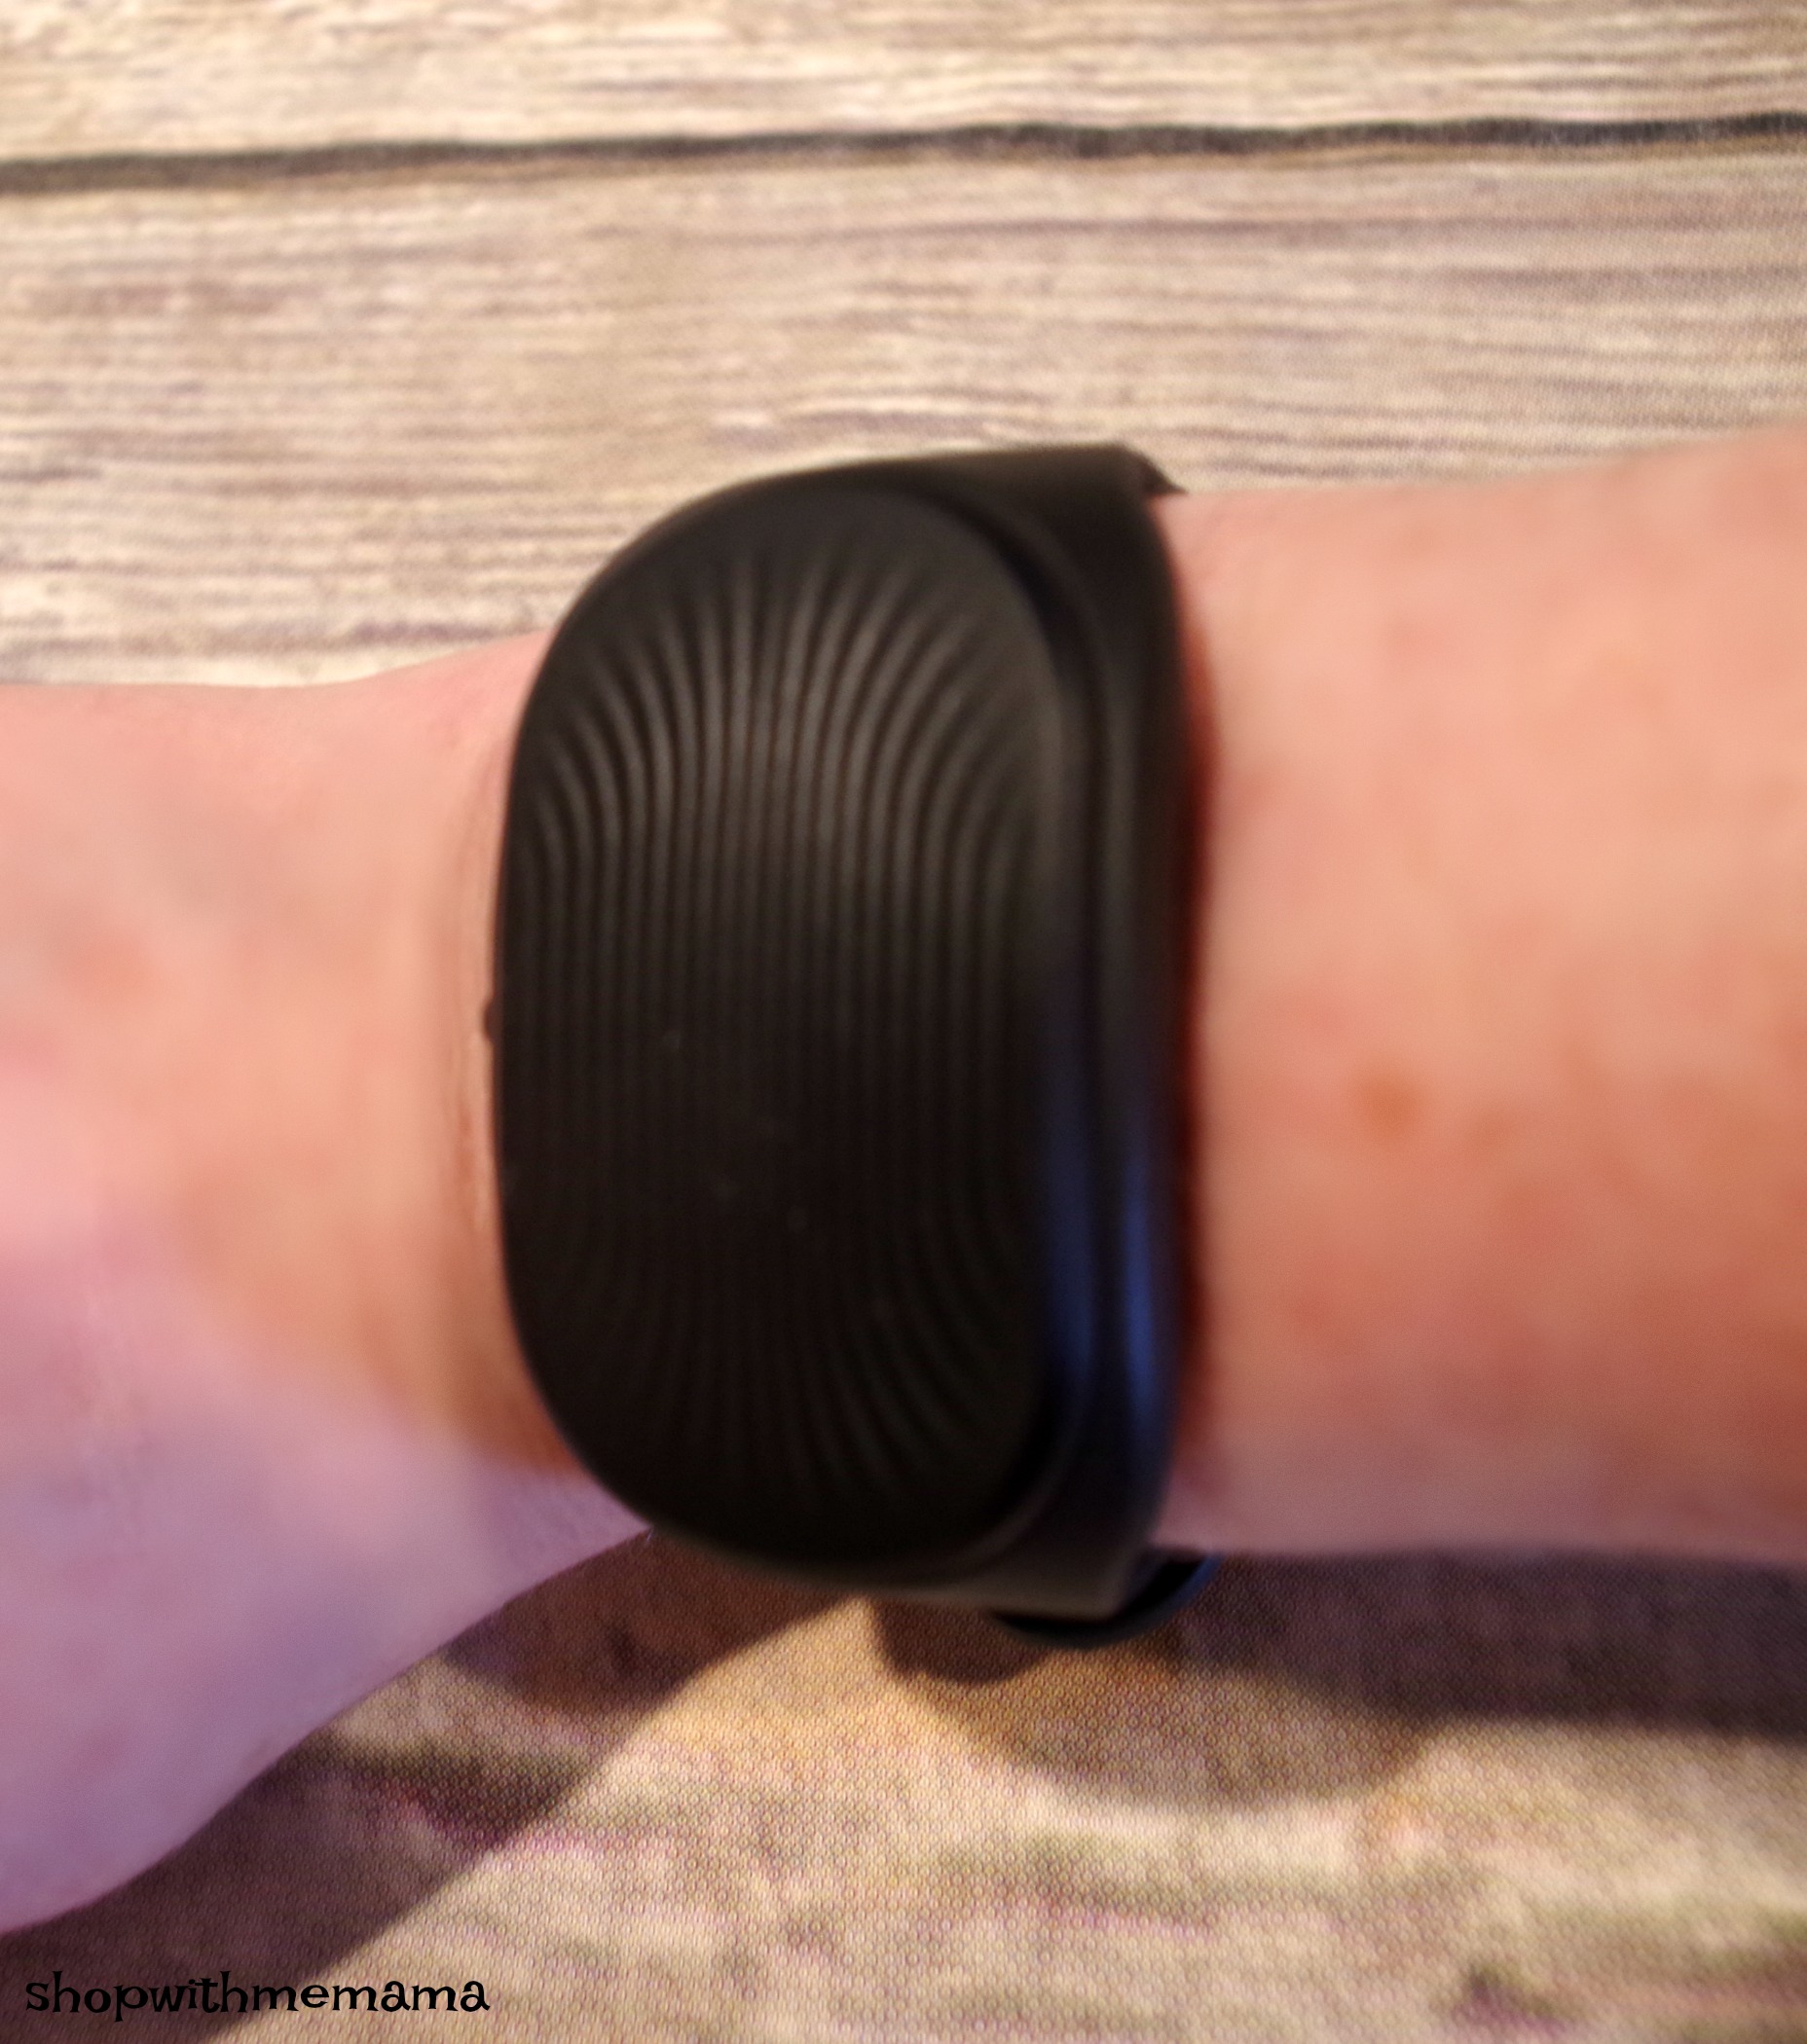 Healbe GoBe 2 All-In-One Fitness Tracker For Calorie Intake And More!